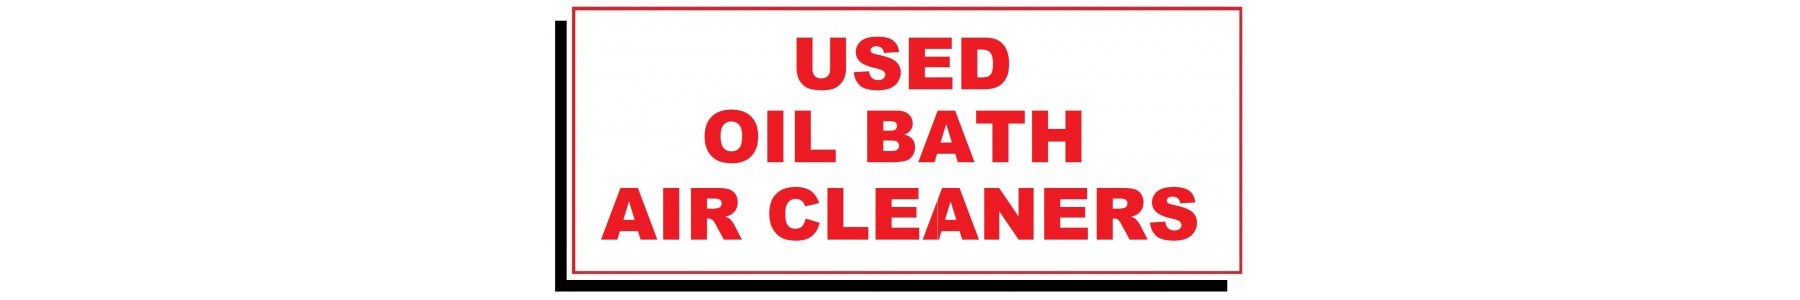 USED OIL BATH AIR CLEANERS